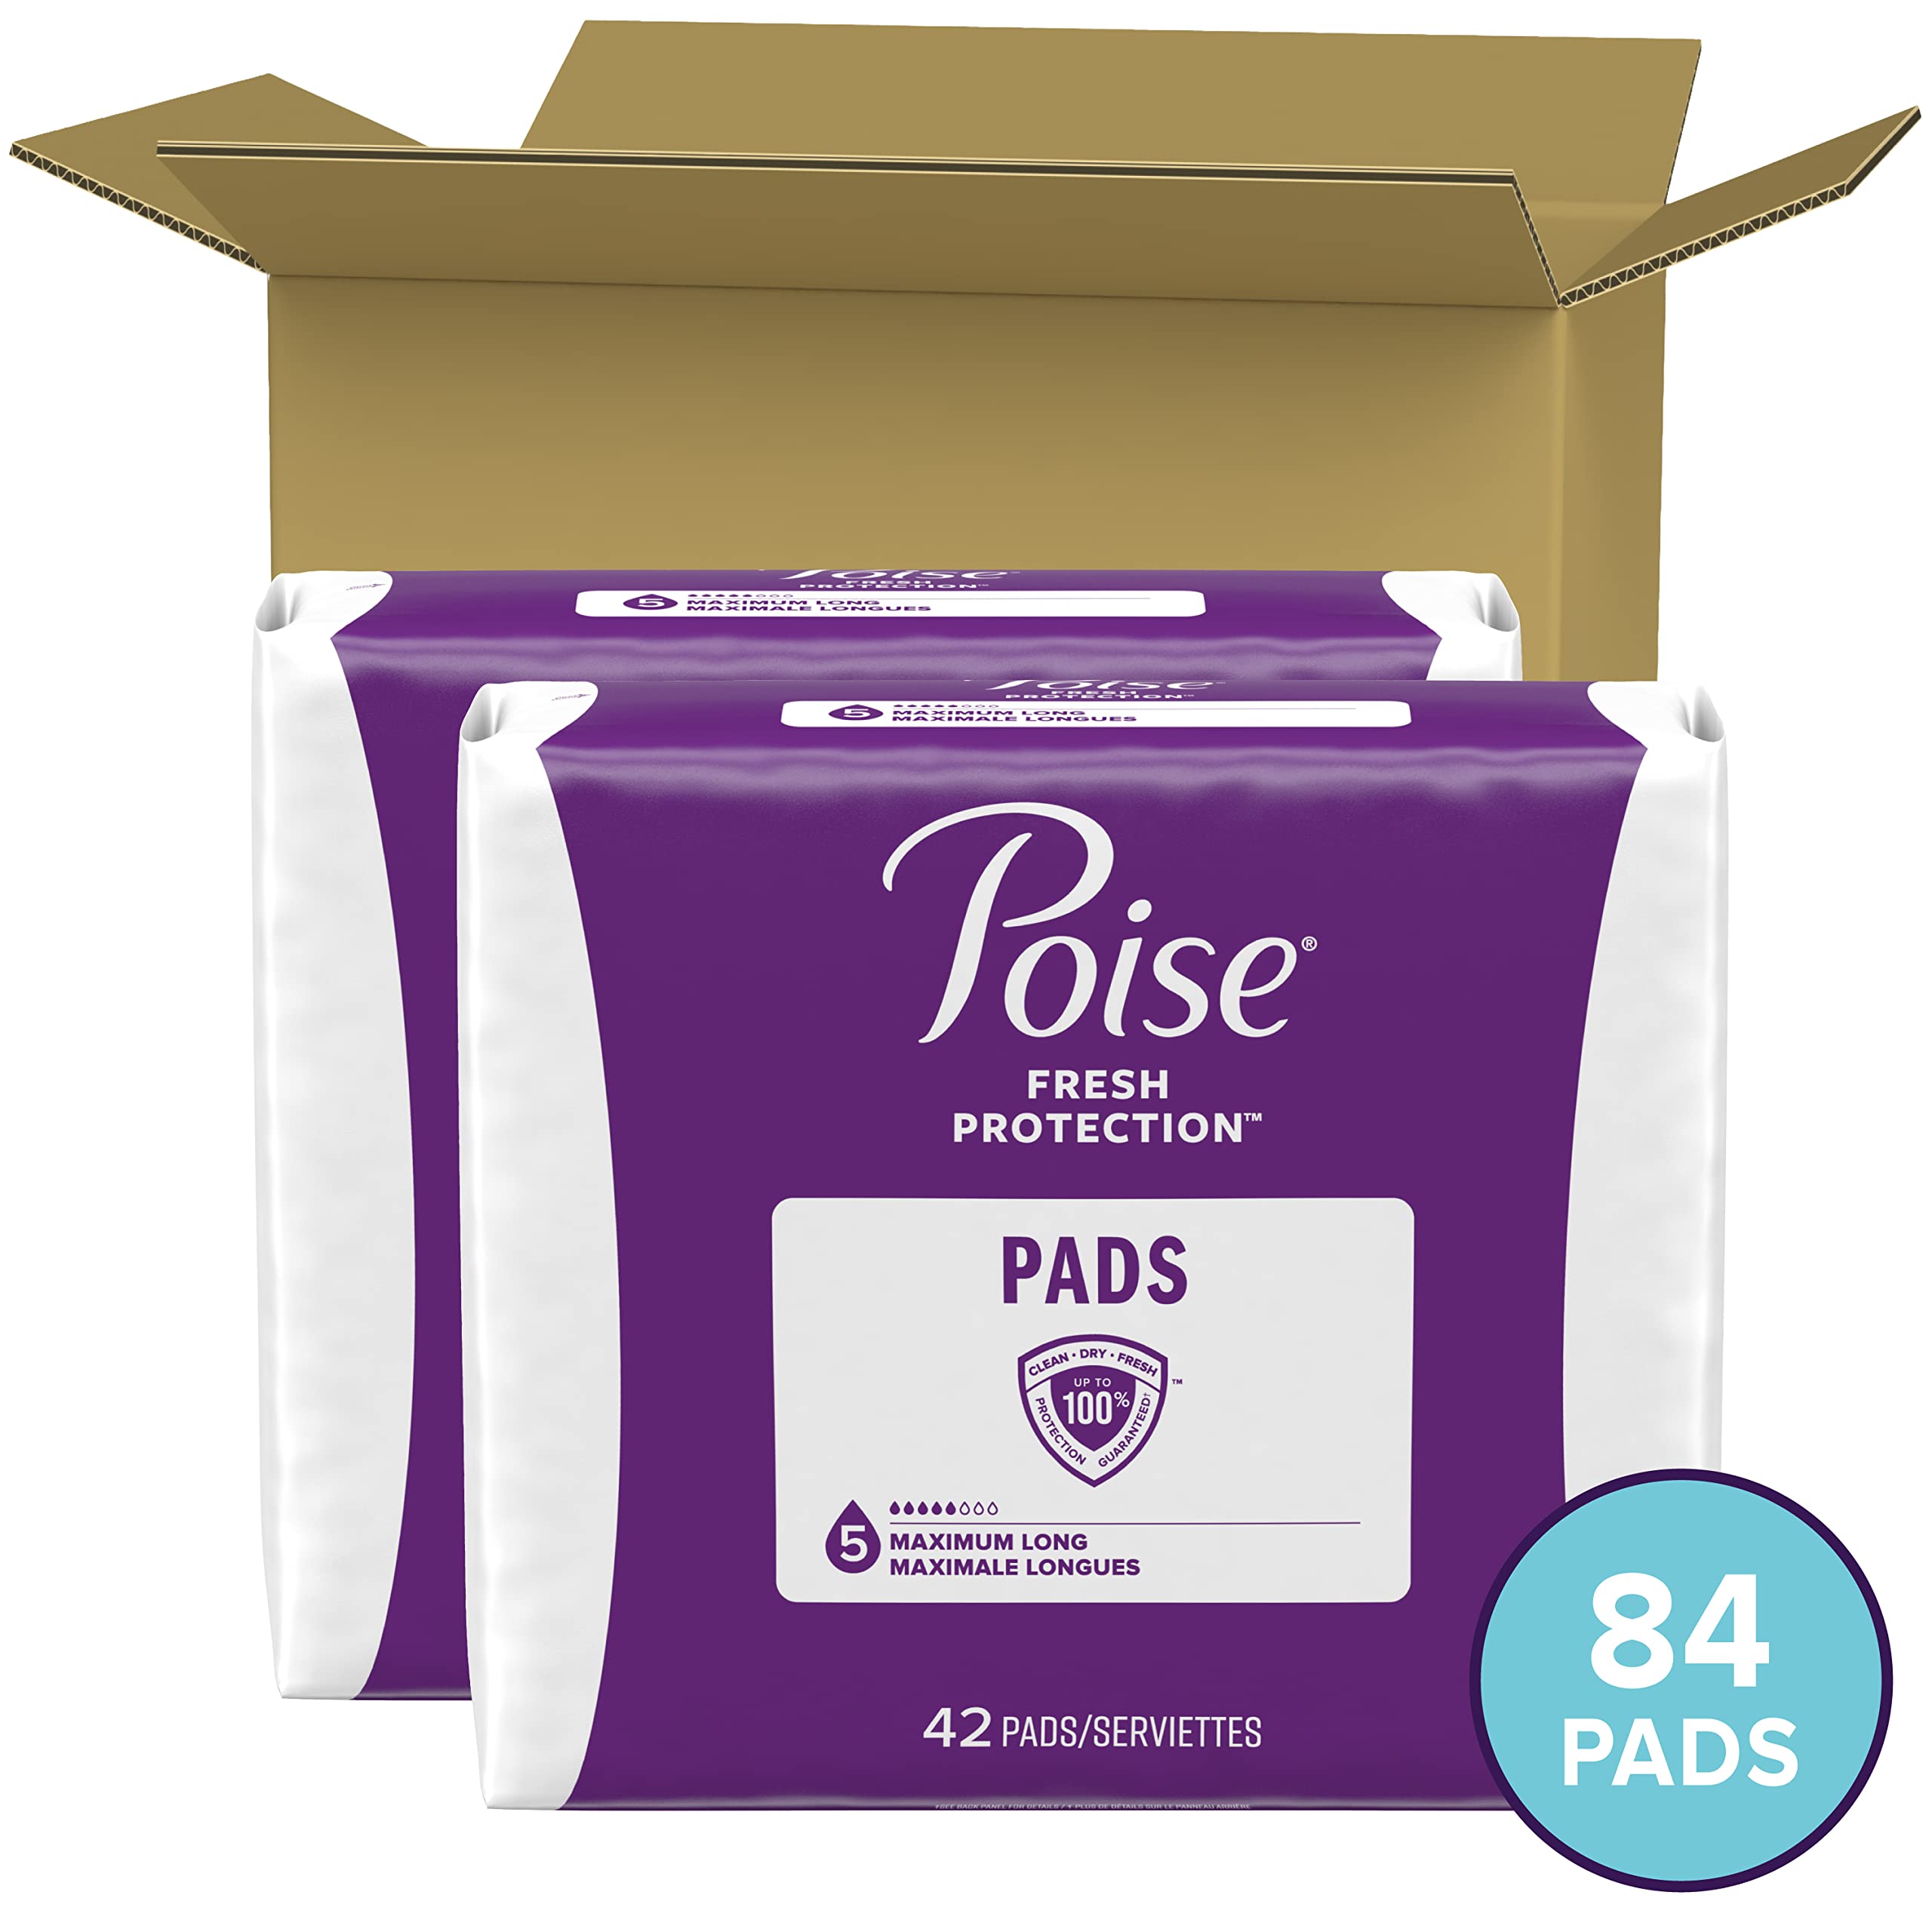 Poise Incontinence Pads & Postpartum Incontinence Pads, 5 Drop Maximum Absorbency, Long Length, 84 Count, Packaging May Vary